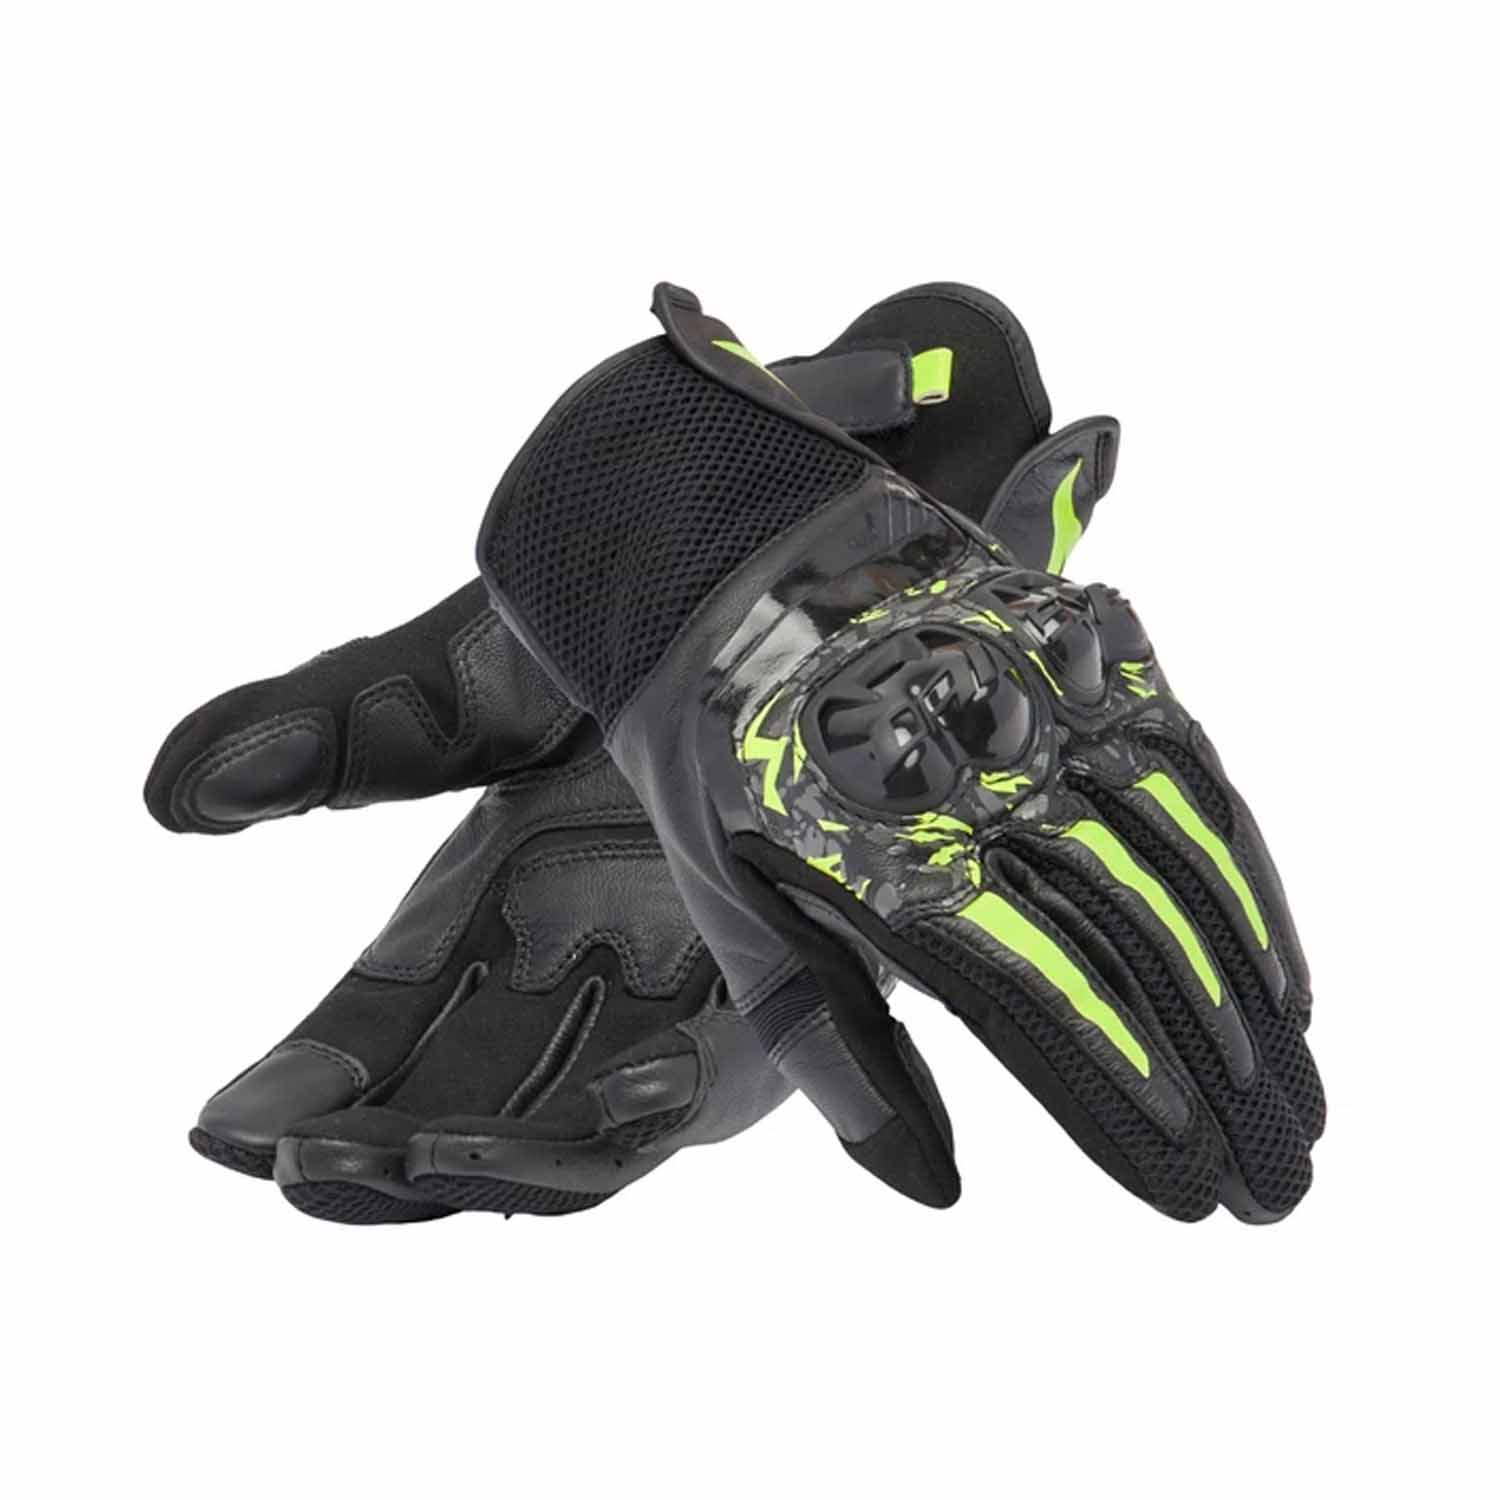 Image of Dainese MIG 3 Gloves Black Anthracite Yellow Fluo Size M ID 8051019701350